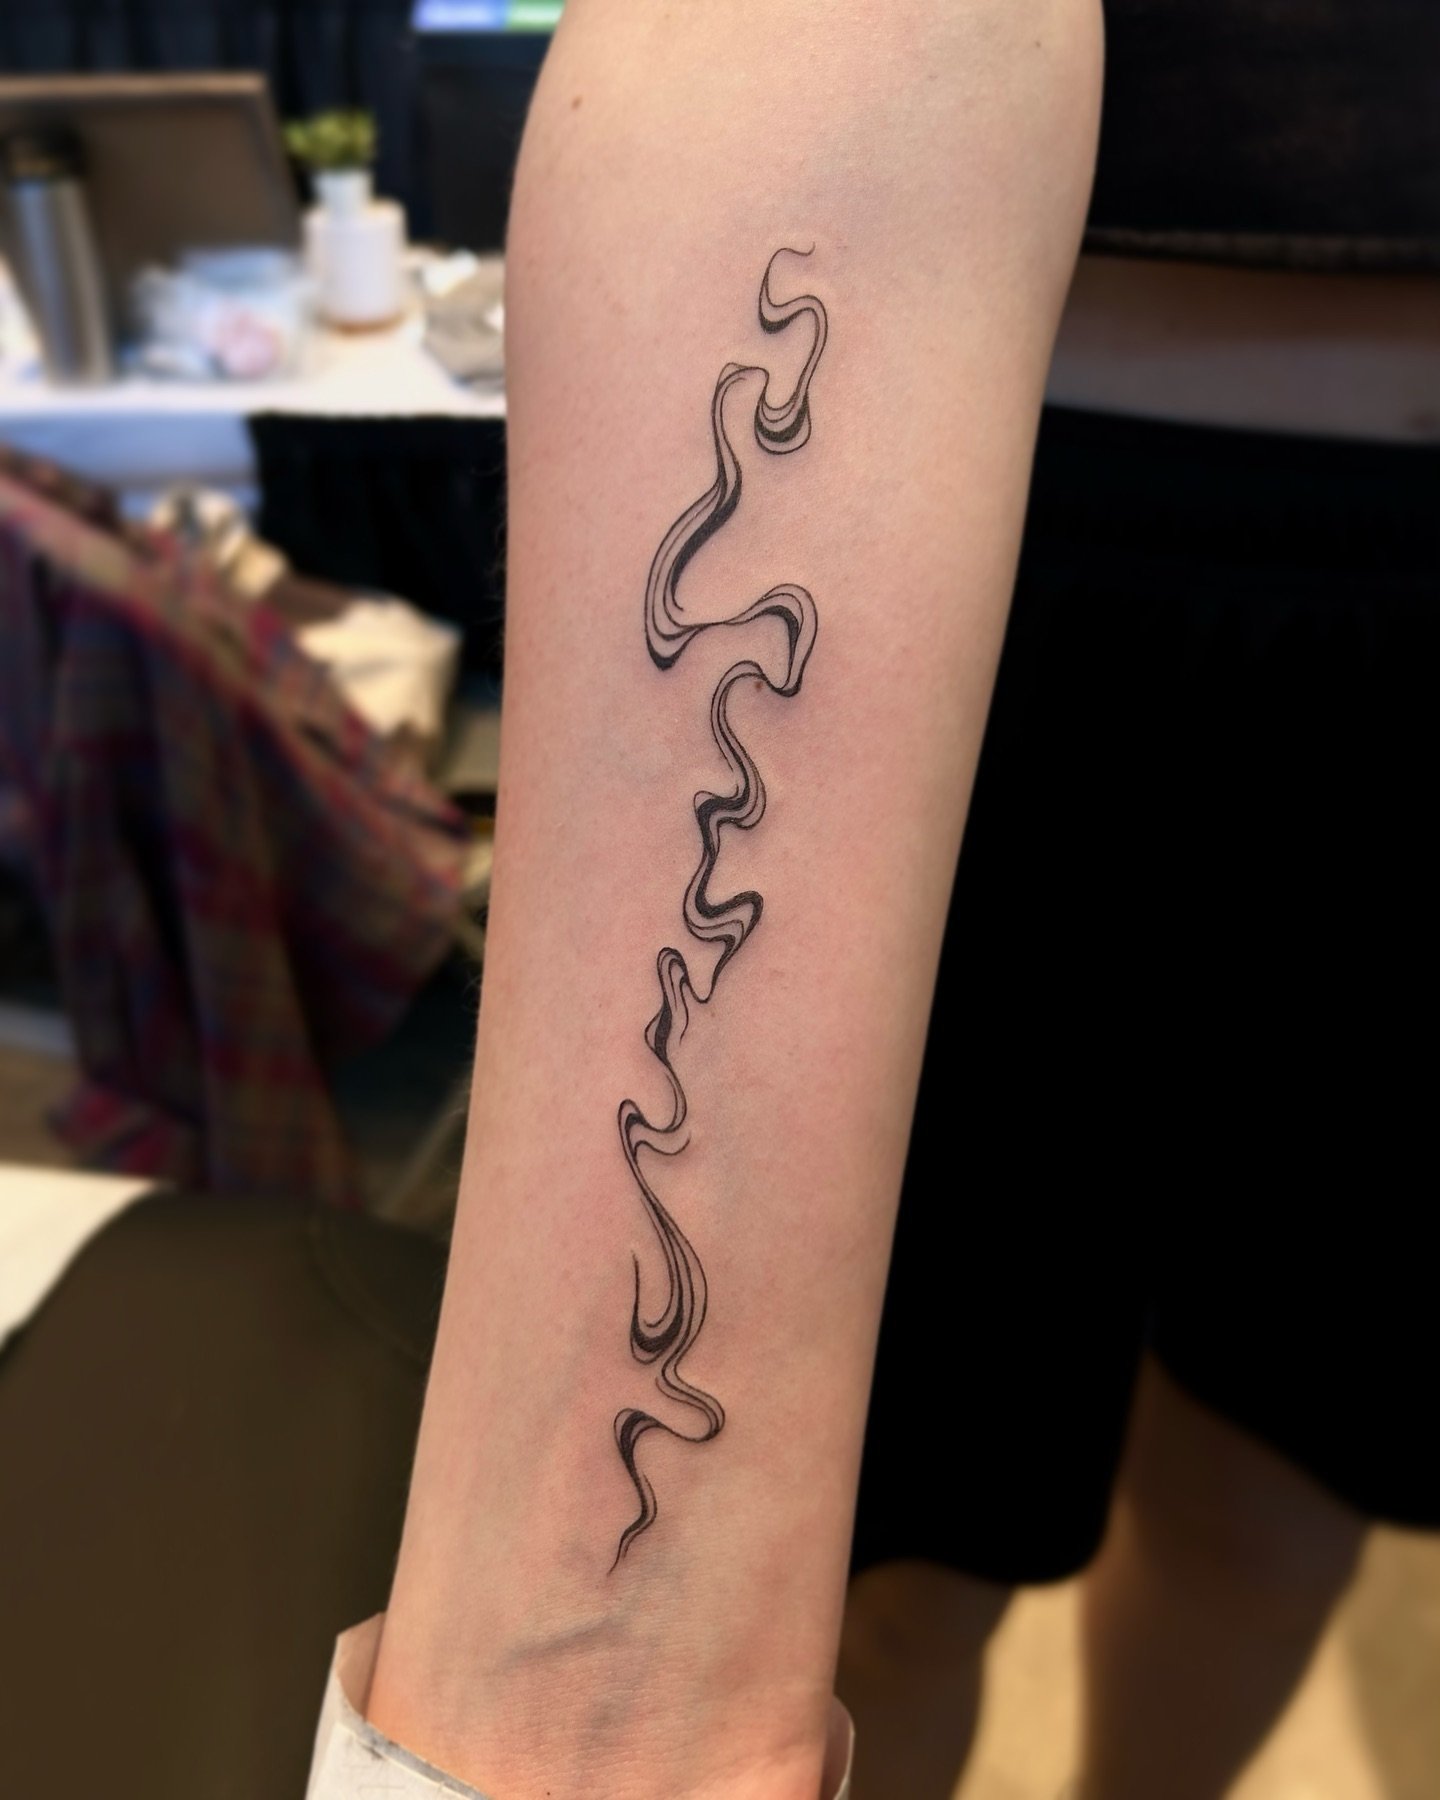 a b s t r a c t &amp;  s w i r l y. 

otherwise known as &ldquo;the squiggly line&rdquo; by all the clients on the waitlist who asked for this flash this weekend. 

thanks for stopping by elliot, 
it was nice talking to you!